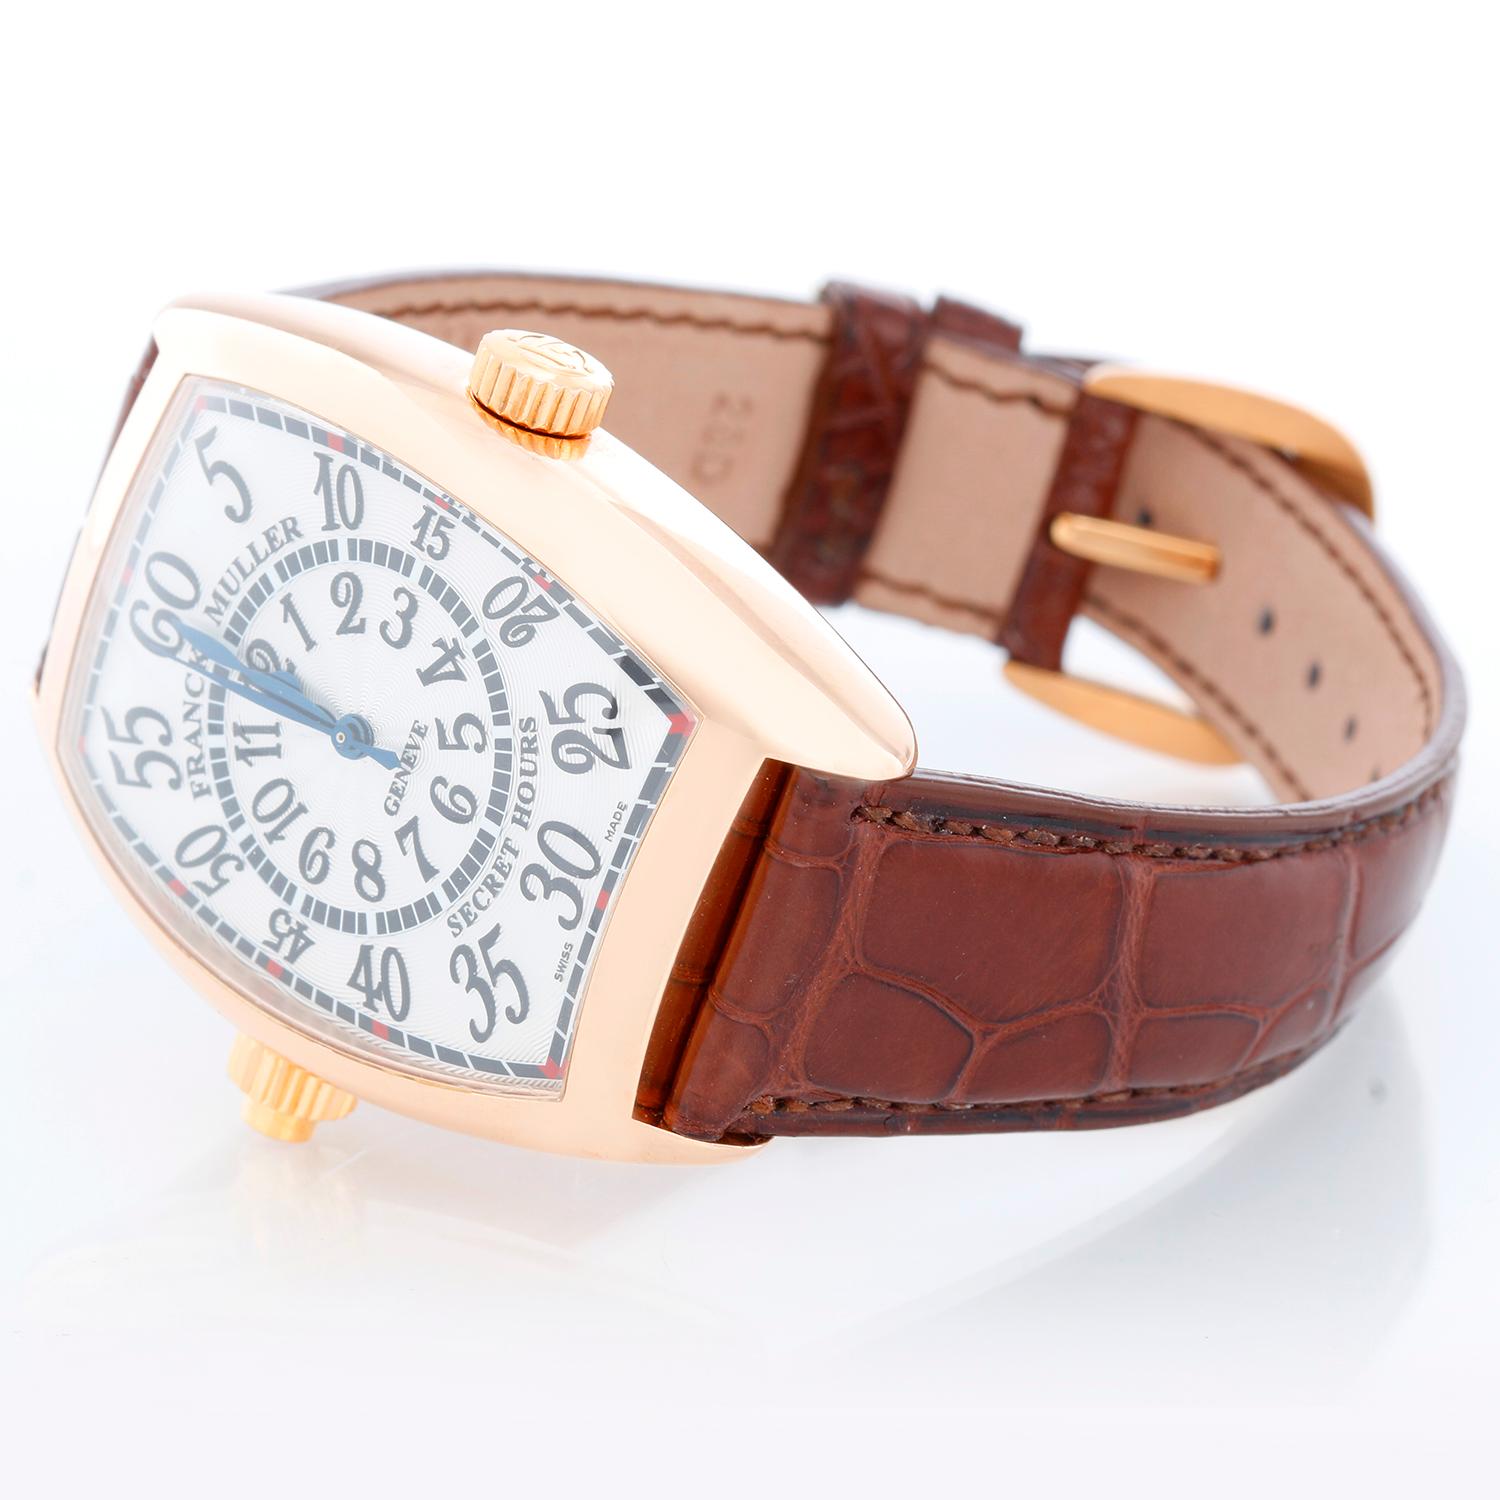 Franck Muller Secret Hours 18K Rose Gold Watch - Automatic. 18K Rose gold case; tonneau ( 36 mm x 50 mm ). Silver dial with secret hours numerals. Brown Alligator strap with tang buckle. Pre-owned with Franck Muller box and papers . 